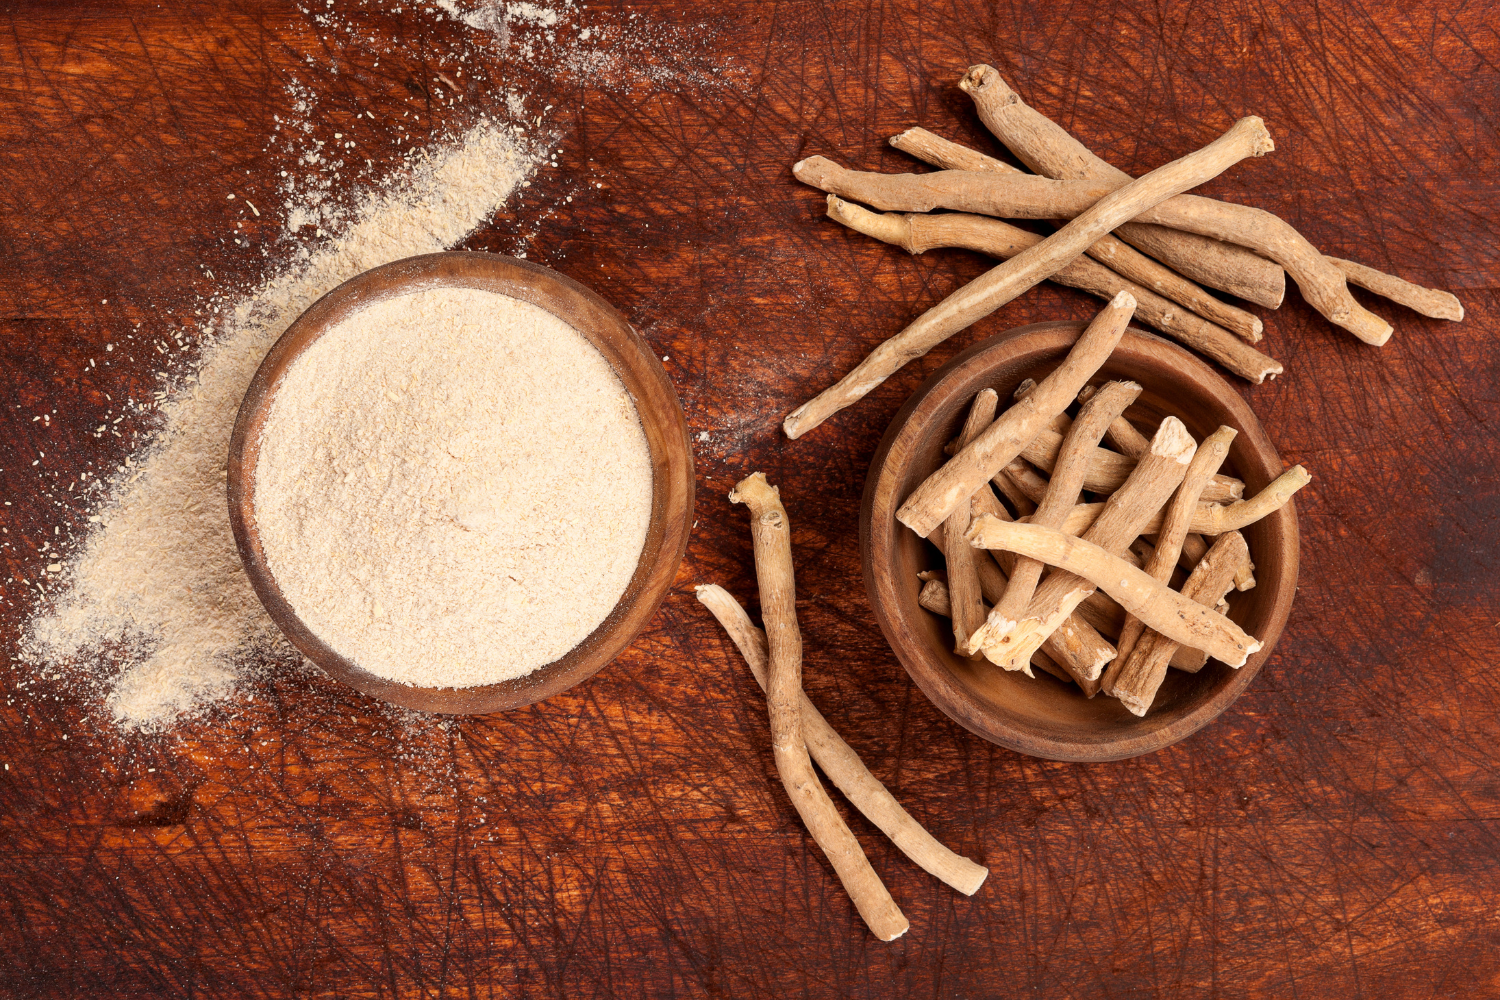 Is Ashwagandha an Effective Supplement for Building Muscle?